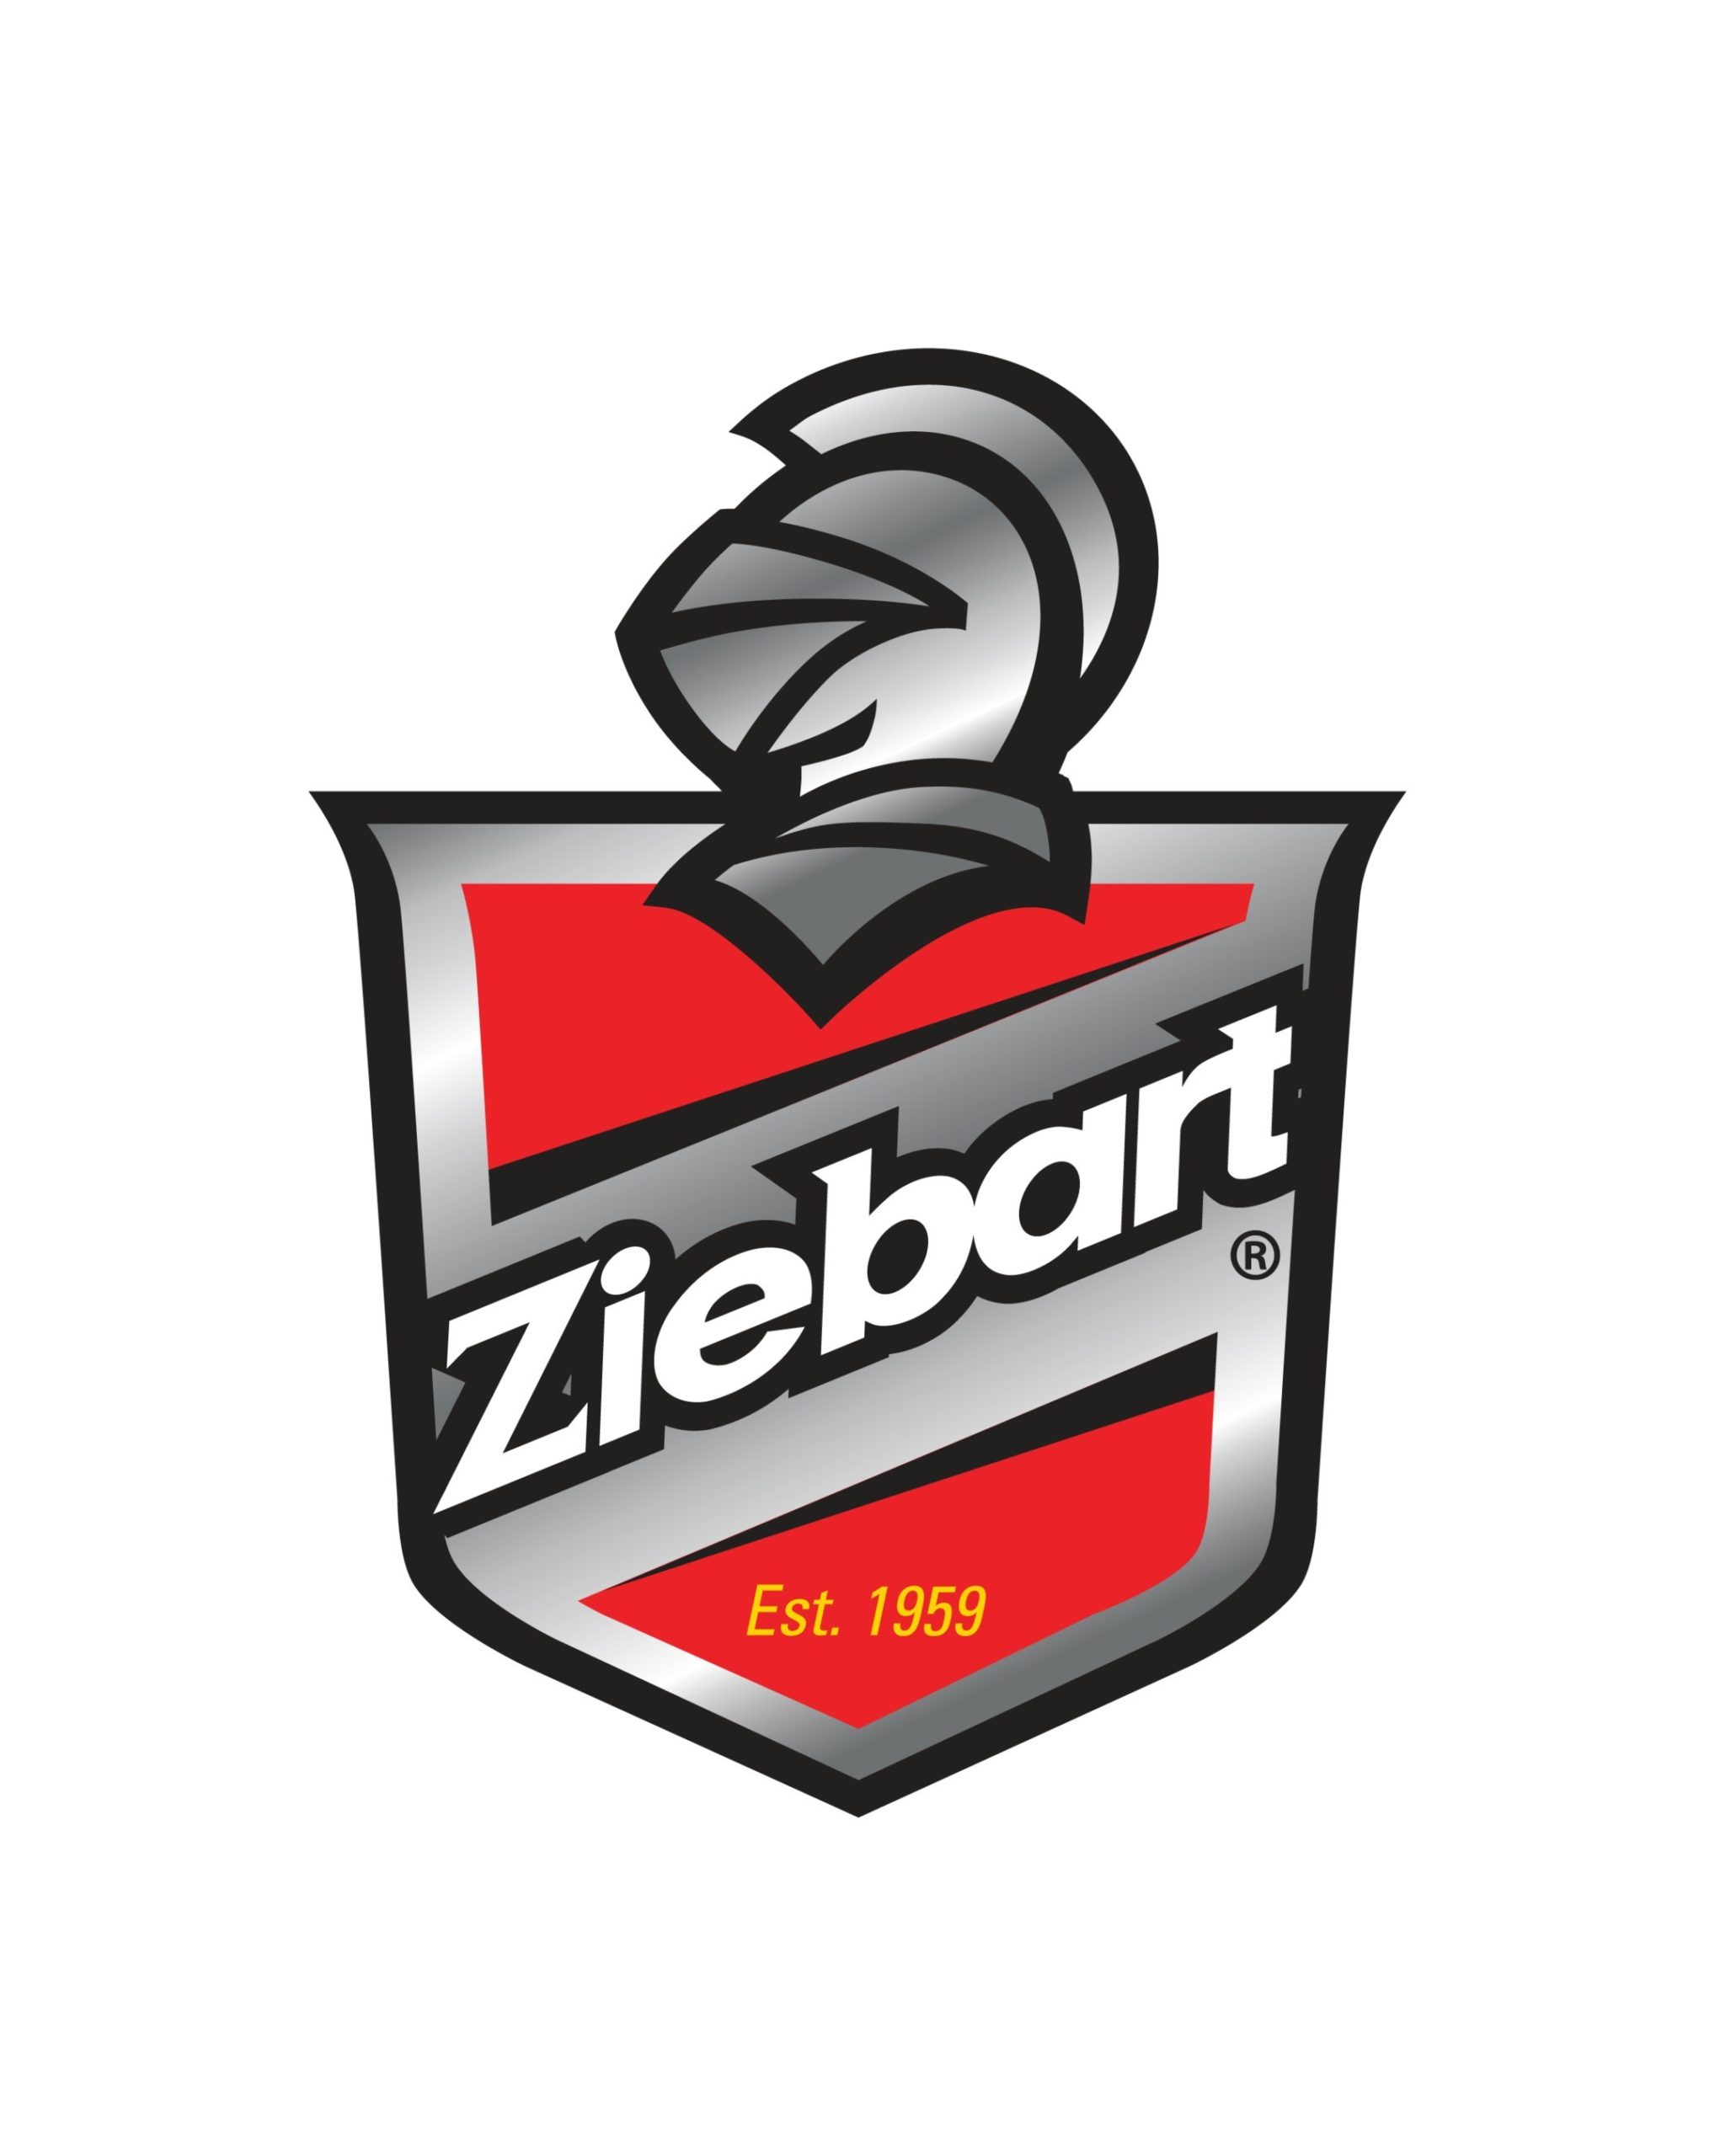 Ziebart Expands to 7 New Countries | THE SHOP